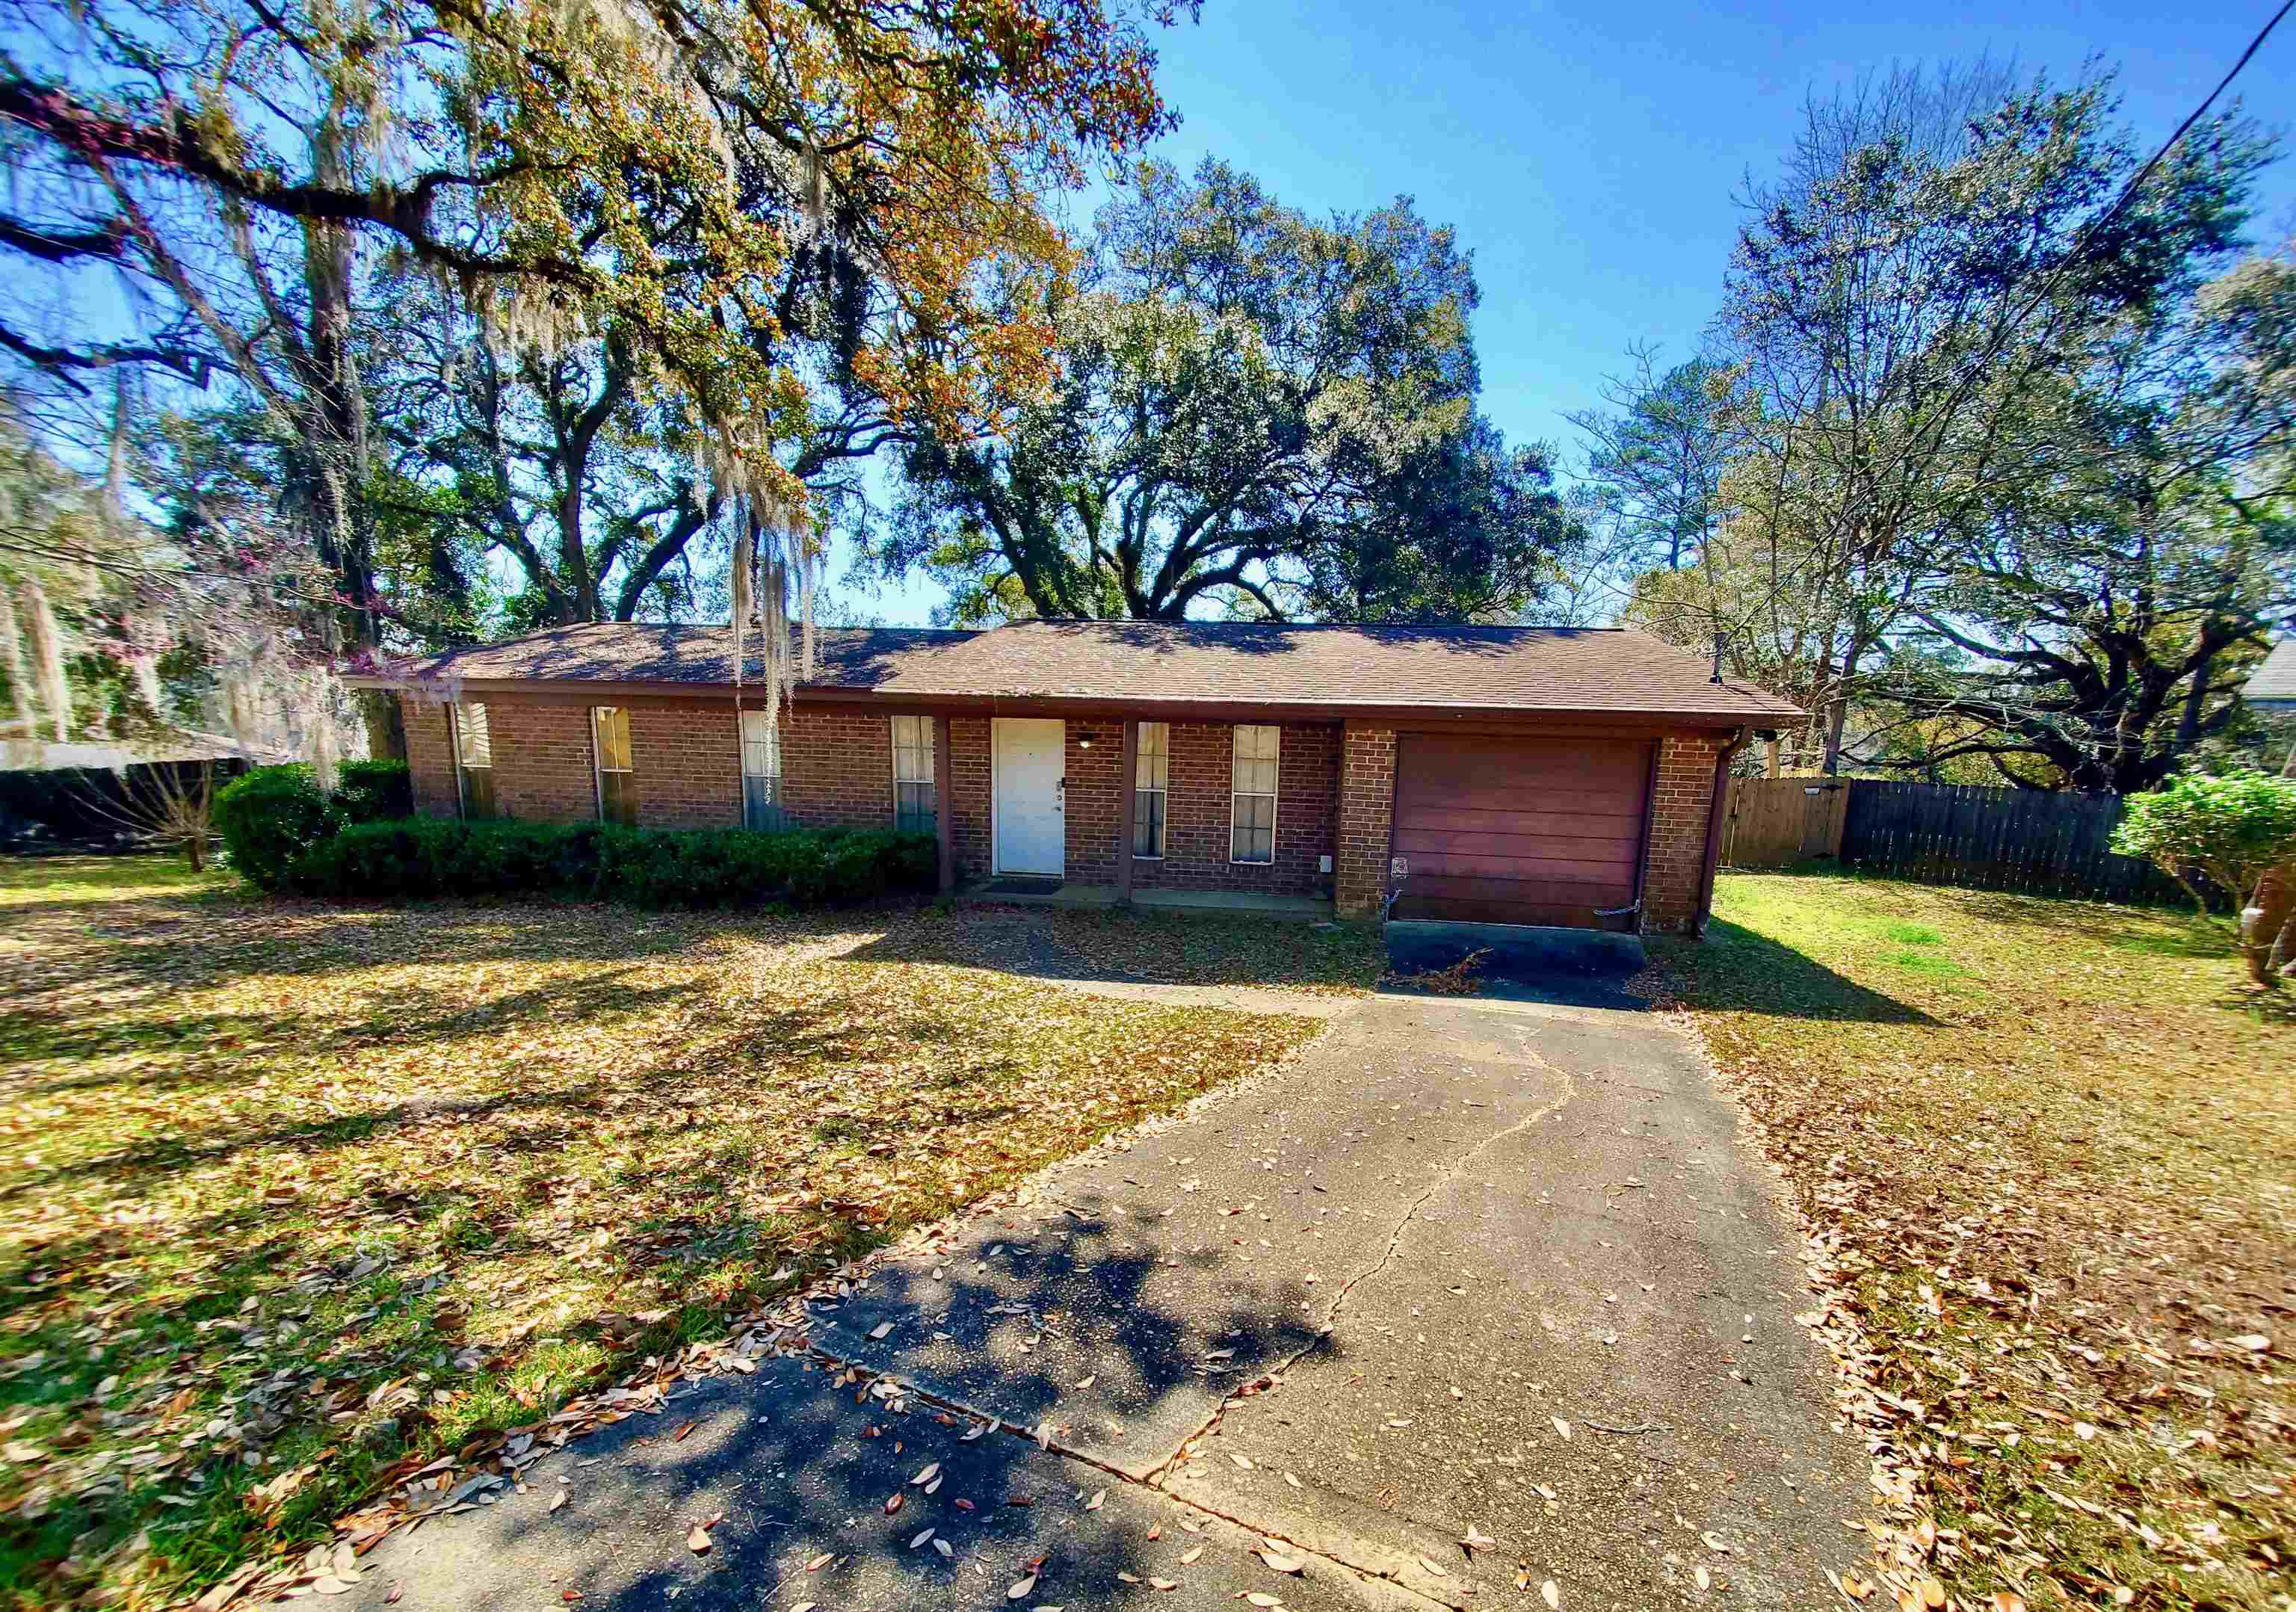 2205 Little Deal Court,TALLAHASSEE,Florida 32308,3 Bedrooms Bedrooms,2 BathroomsBathrooms,Detached single family,2205 Little Deal Court,369969